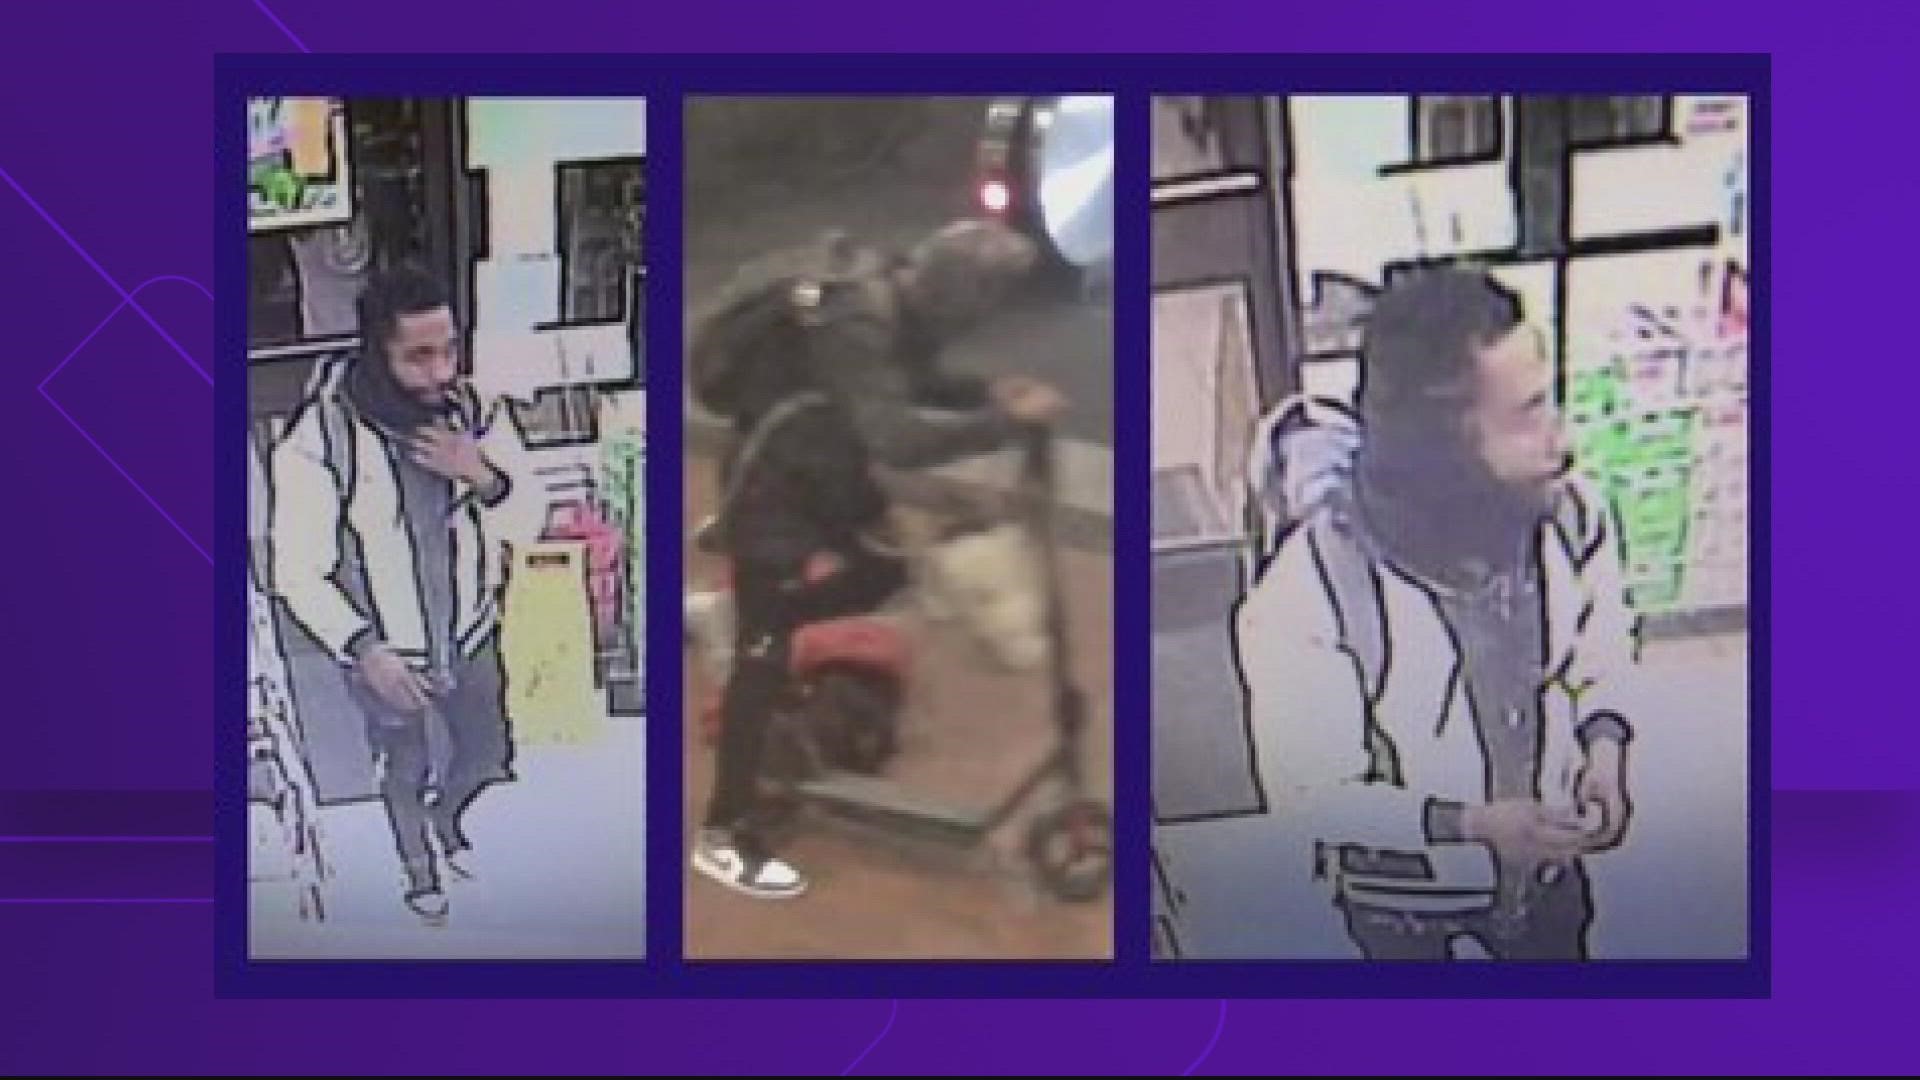 Police are still searching for the suspect who was caught on surveillance camera.